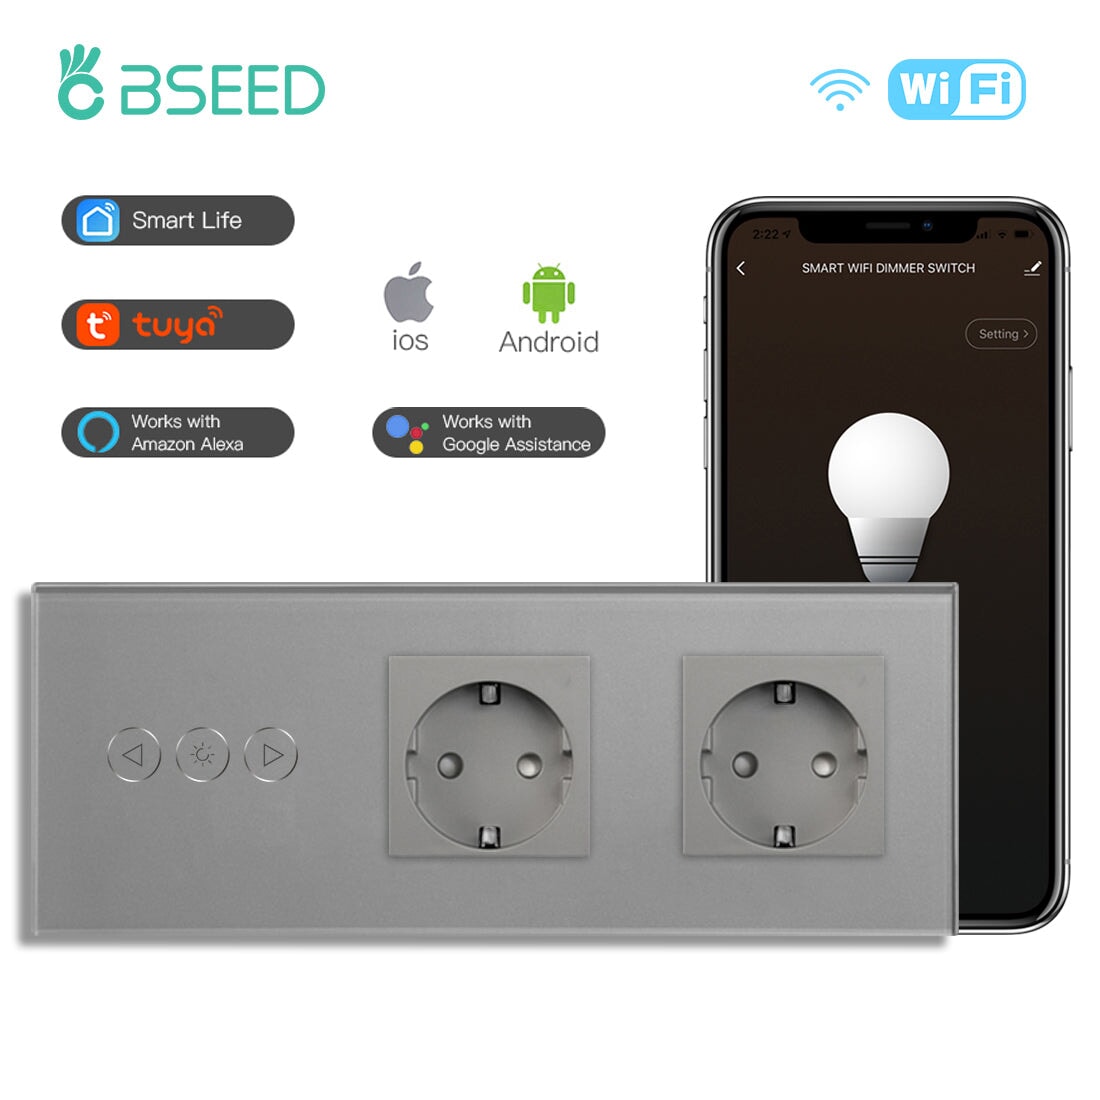 Bseed Smart WiFi Dimmer Switches With Normal EU Standard Wall Sockets 228mm Light Switches Bseedswitch Grey 